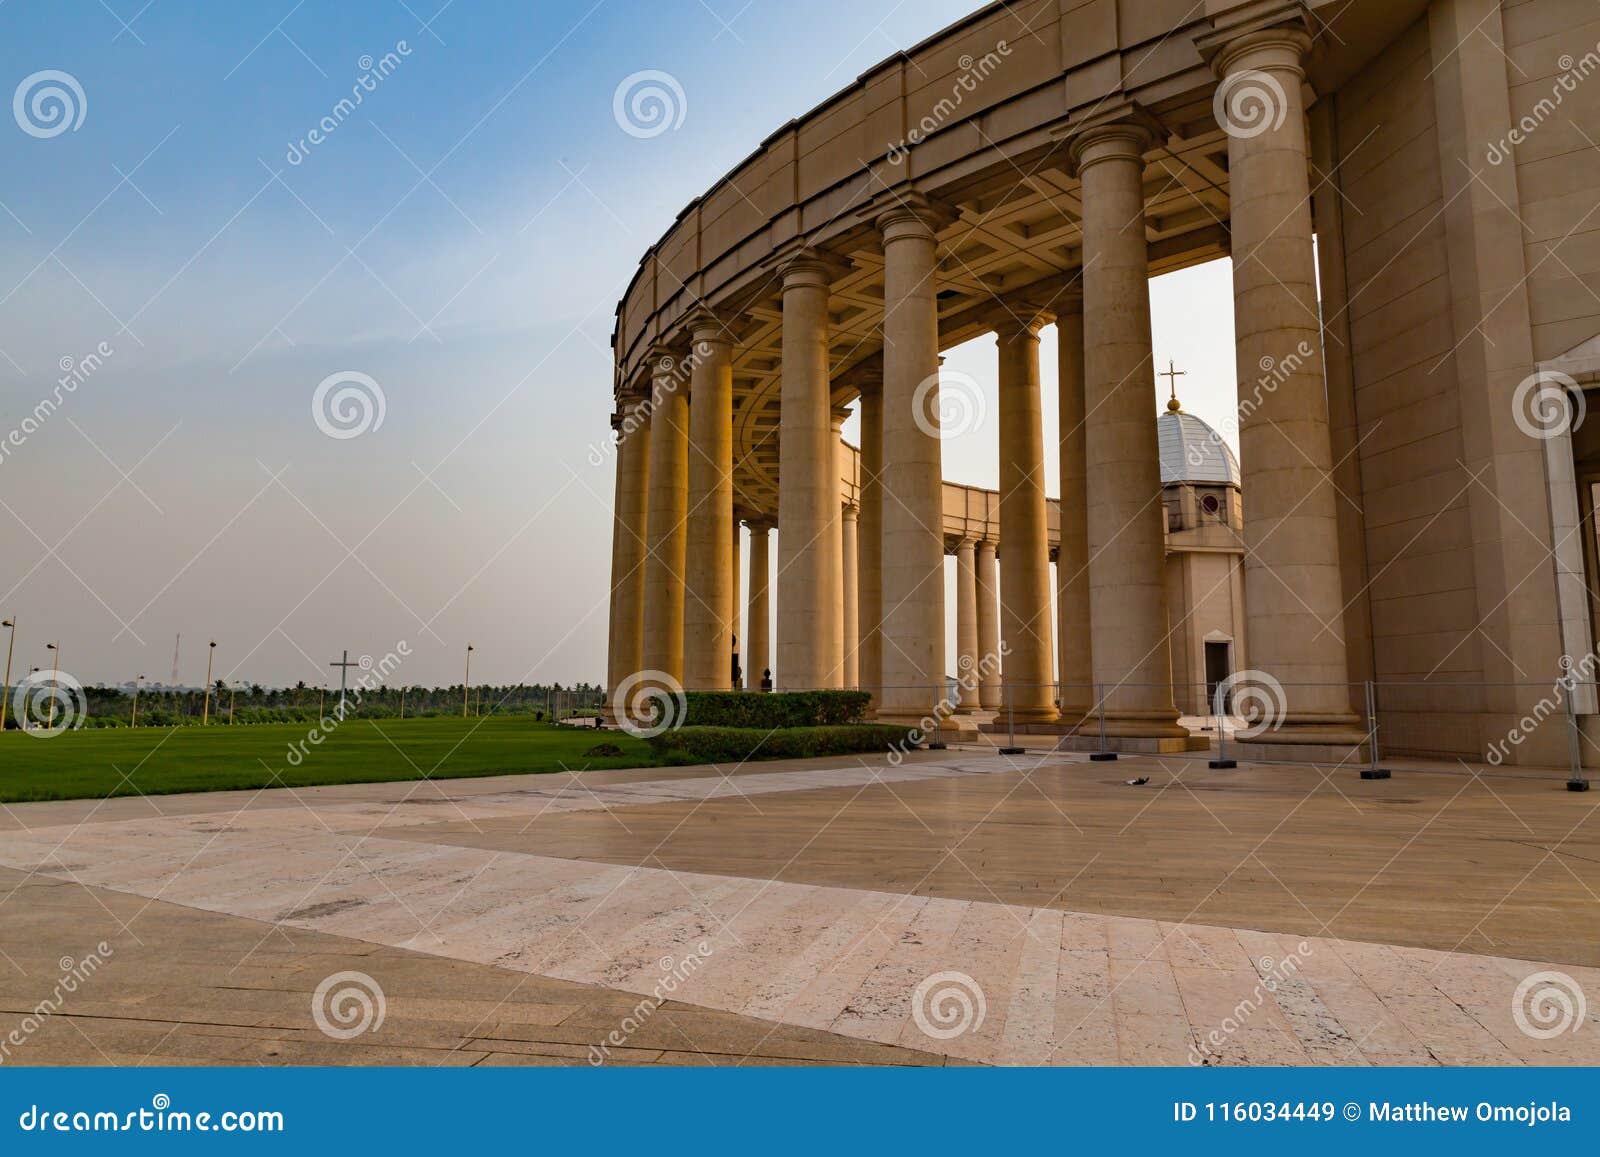 outer view of one of the colonnades of the basilica of our lady of peace with the setting sun to the west